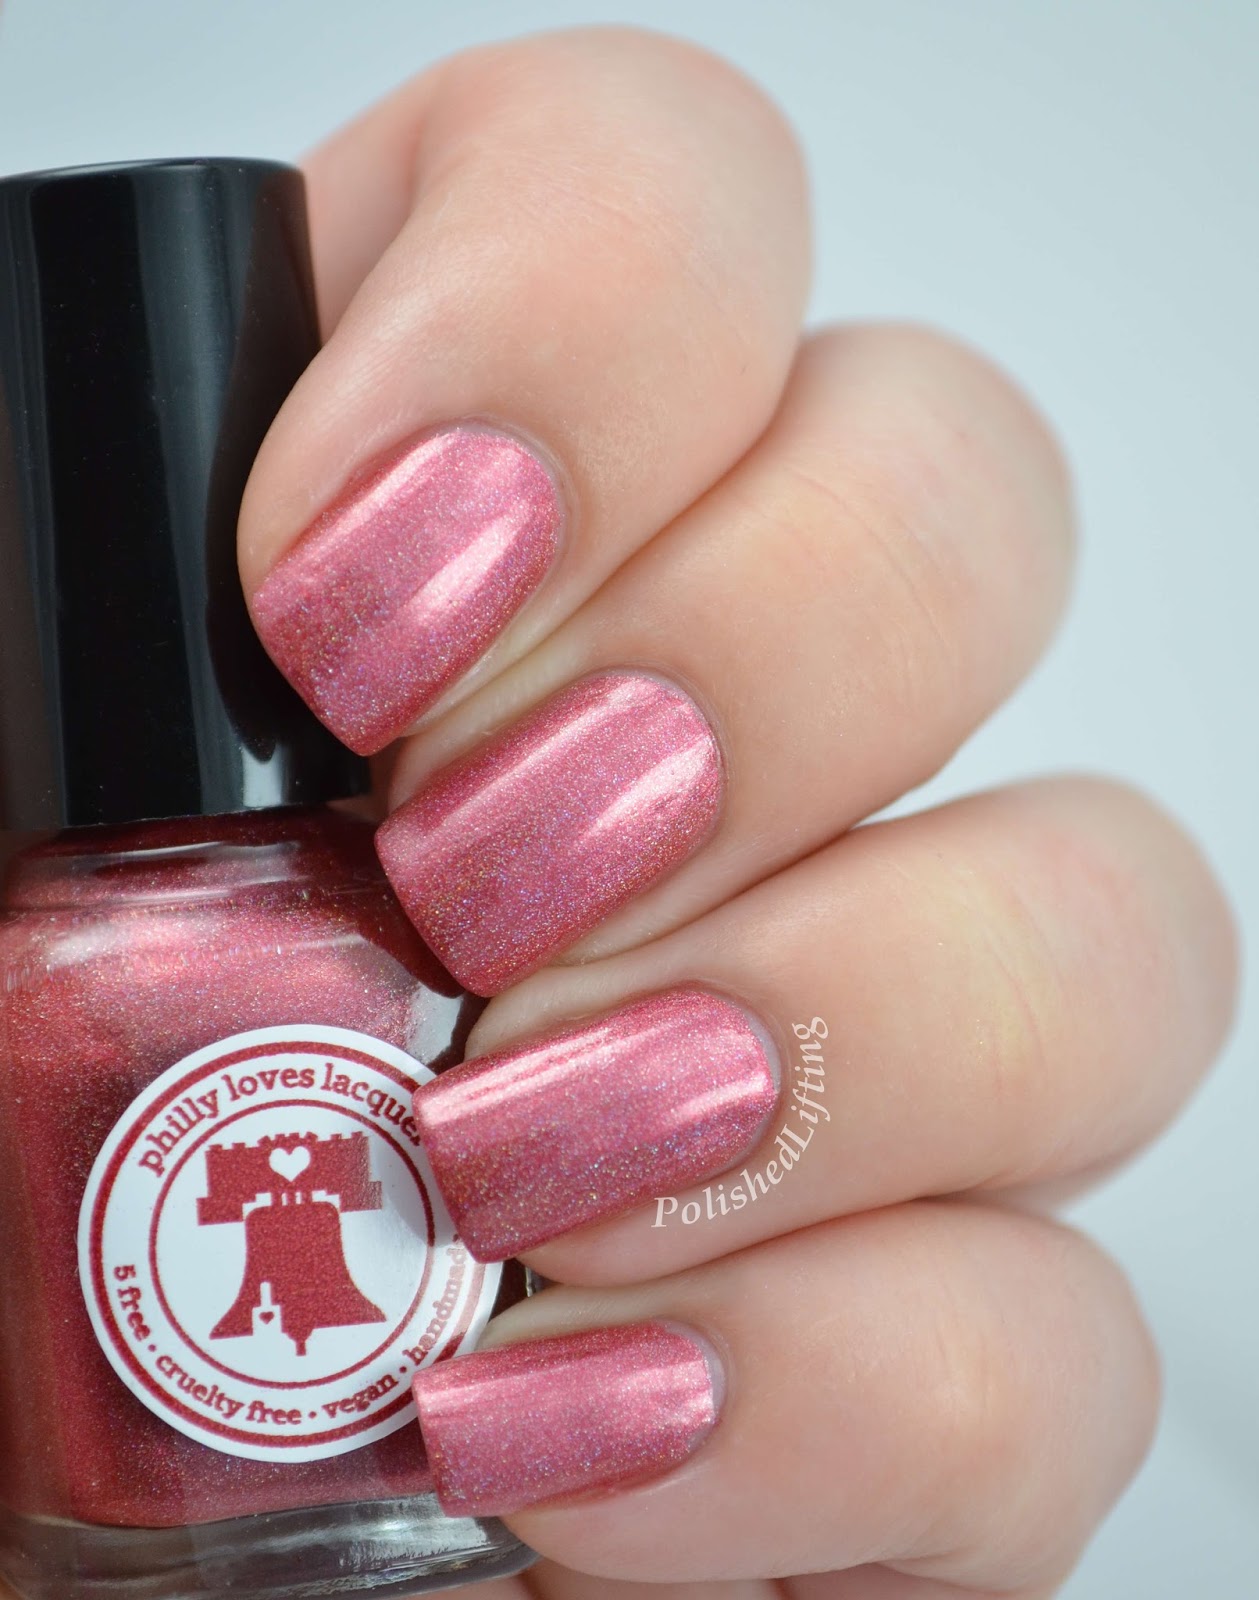 Philly Loves Lacquer S.C.